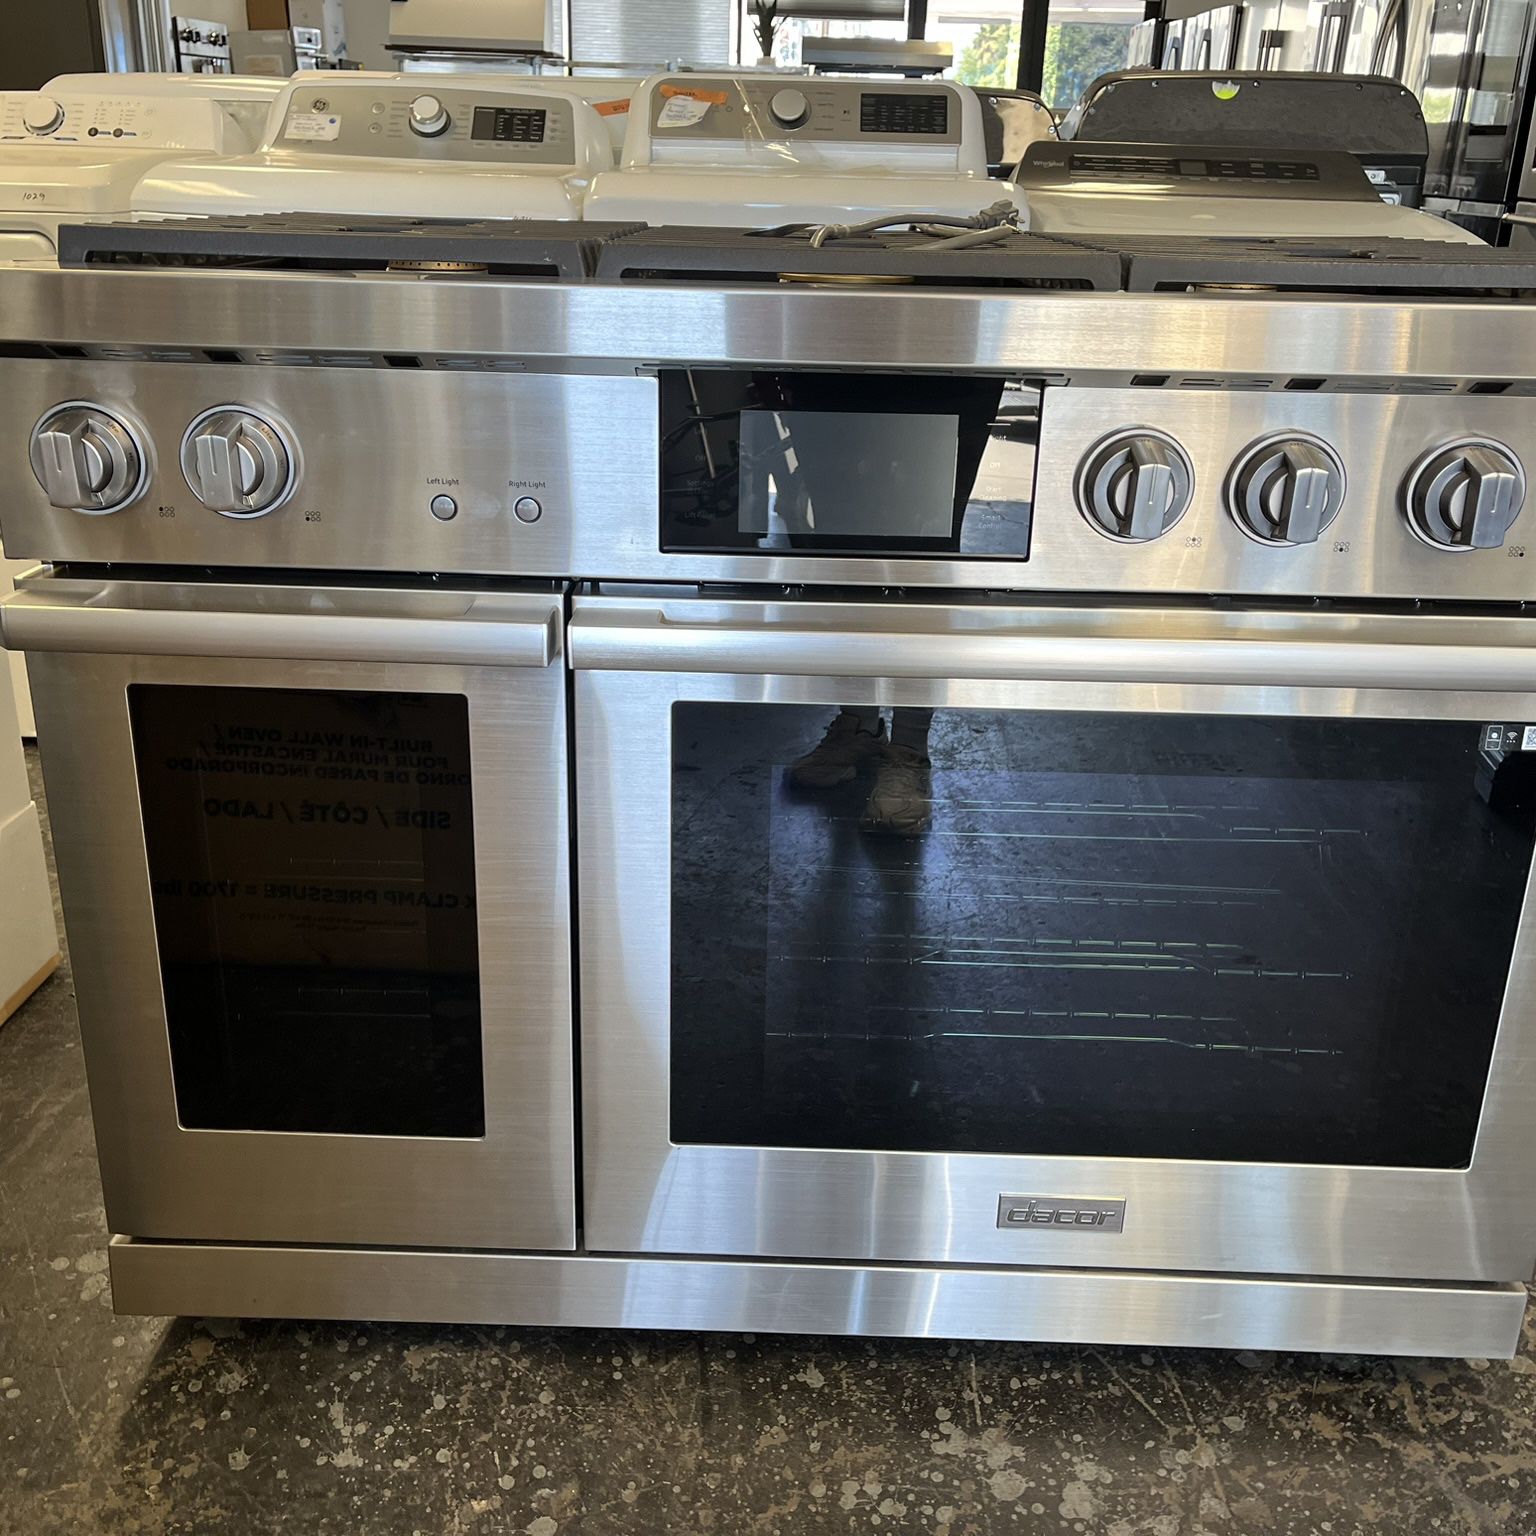 🚨🚨 Dacor 48” Built In All Gas Range Stainless Steel Stove🚨🚨